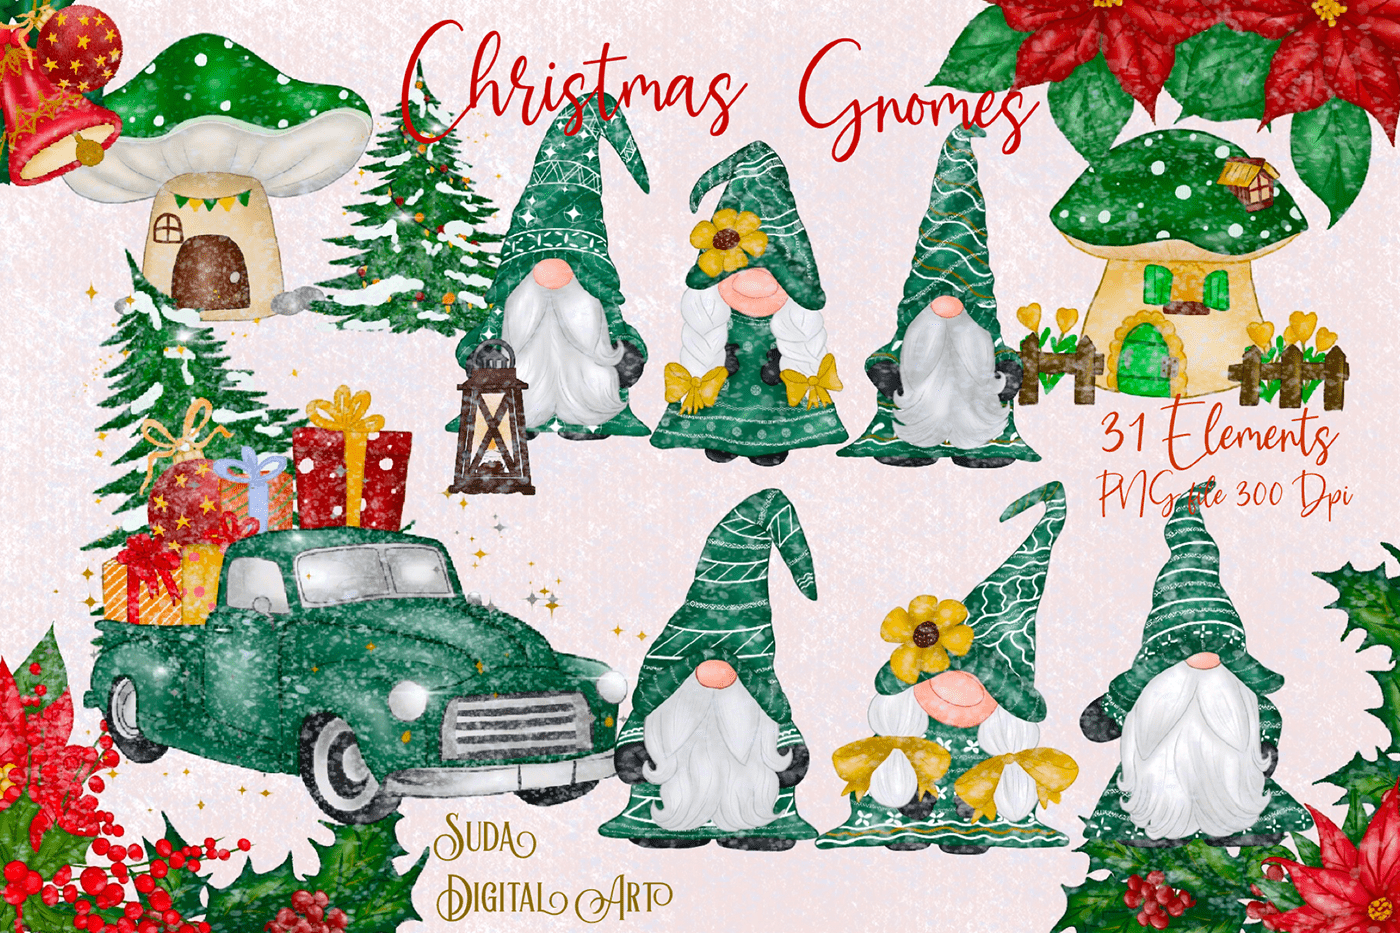 Christmas gnomes graphic happy christmas Happy Holidays happy new year Merry Christmas